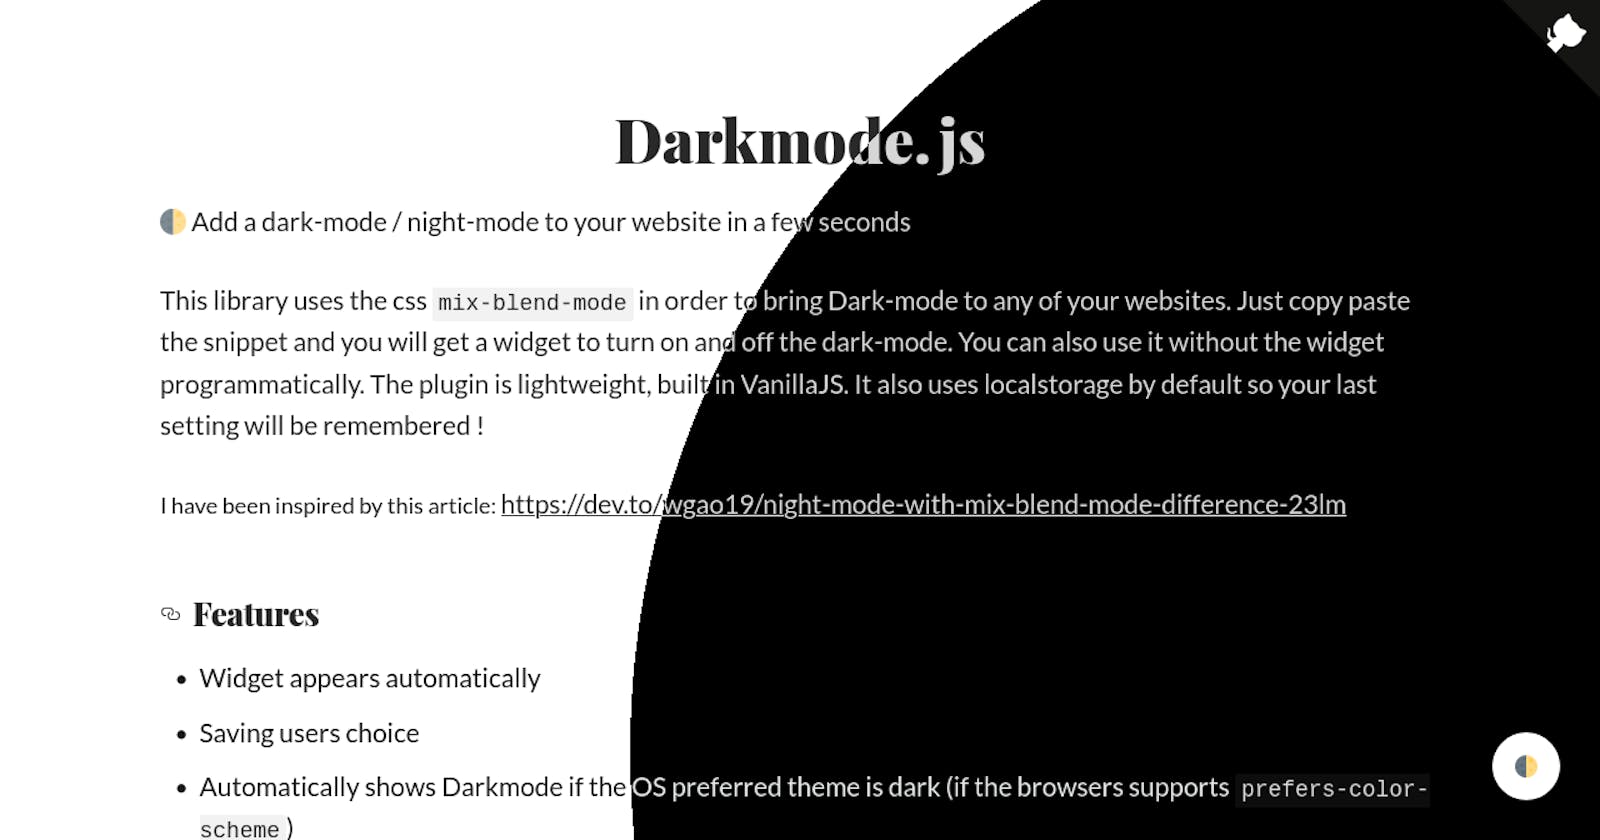 How to Add Dark mode toggle to your website